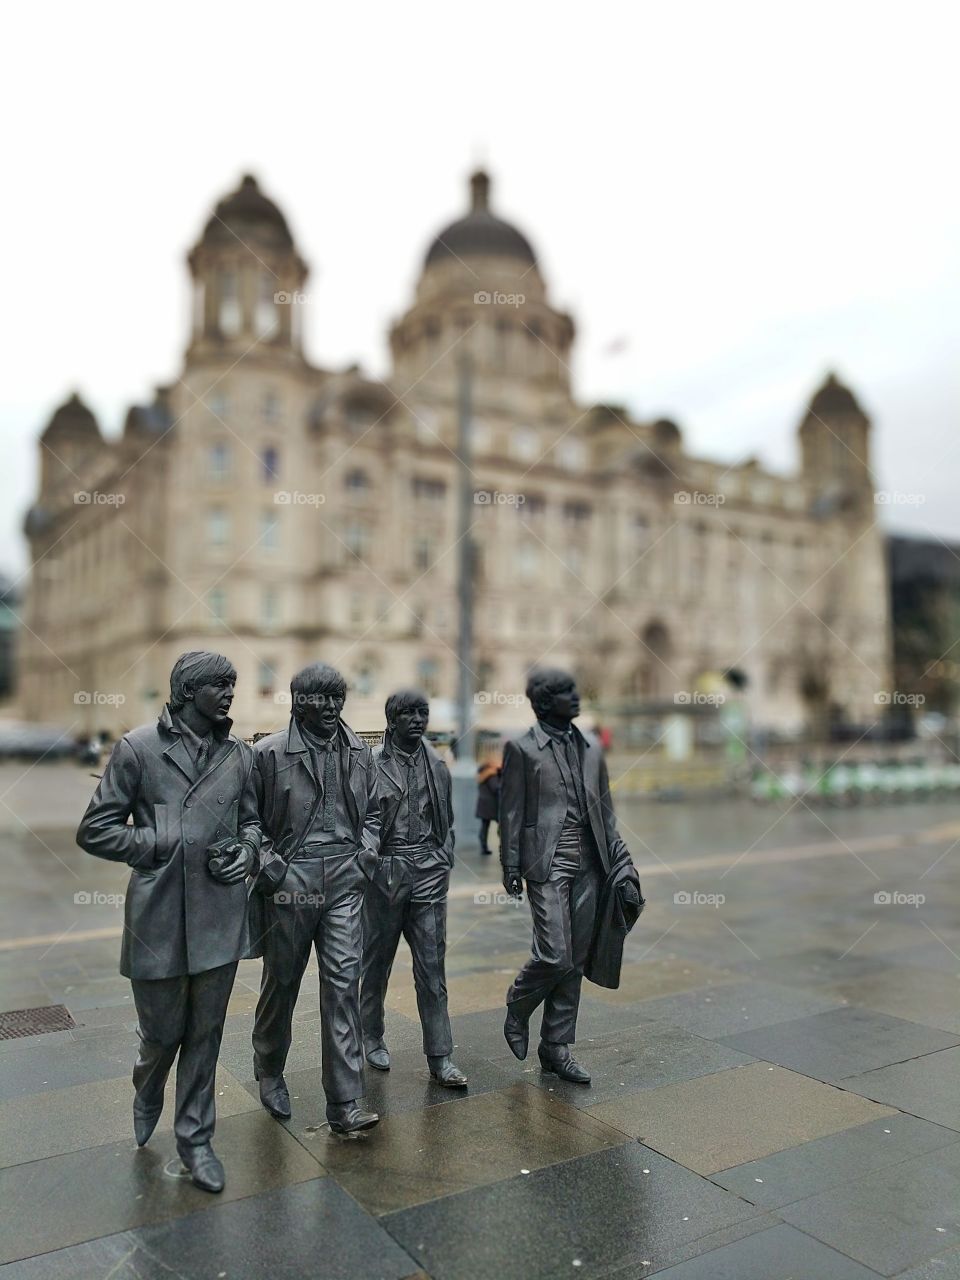 The Beatles, Liverpool